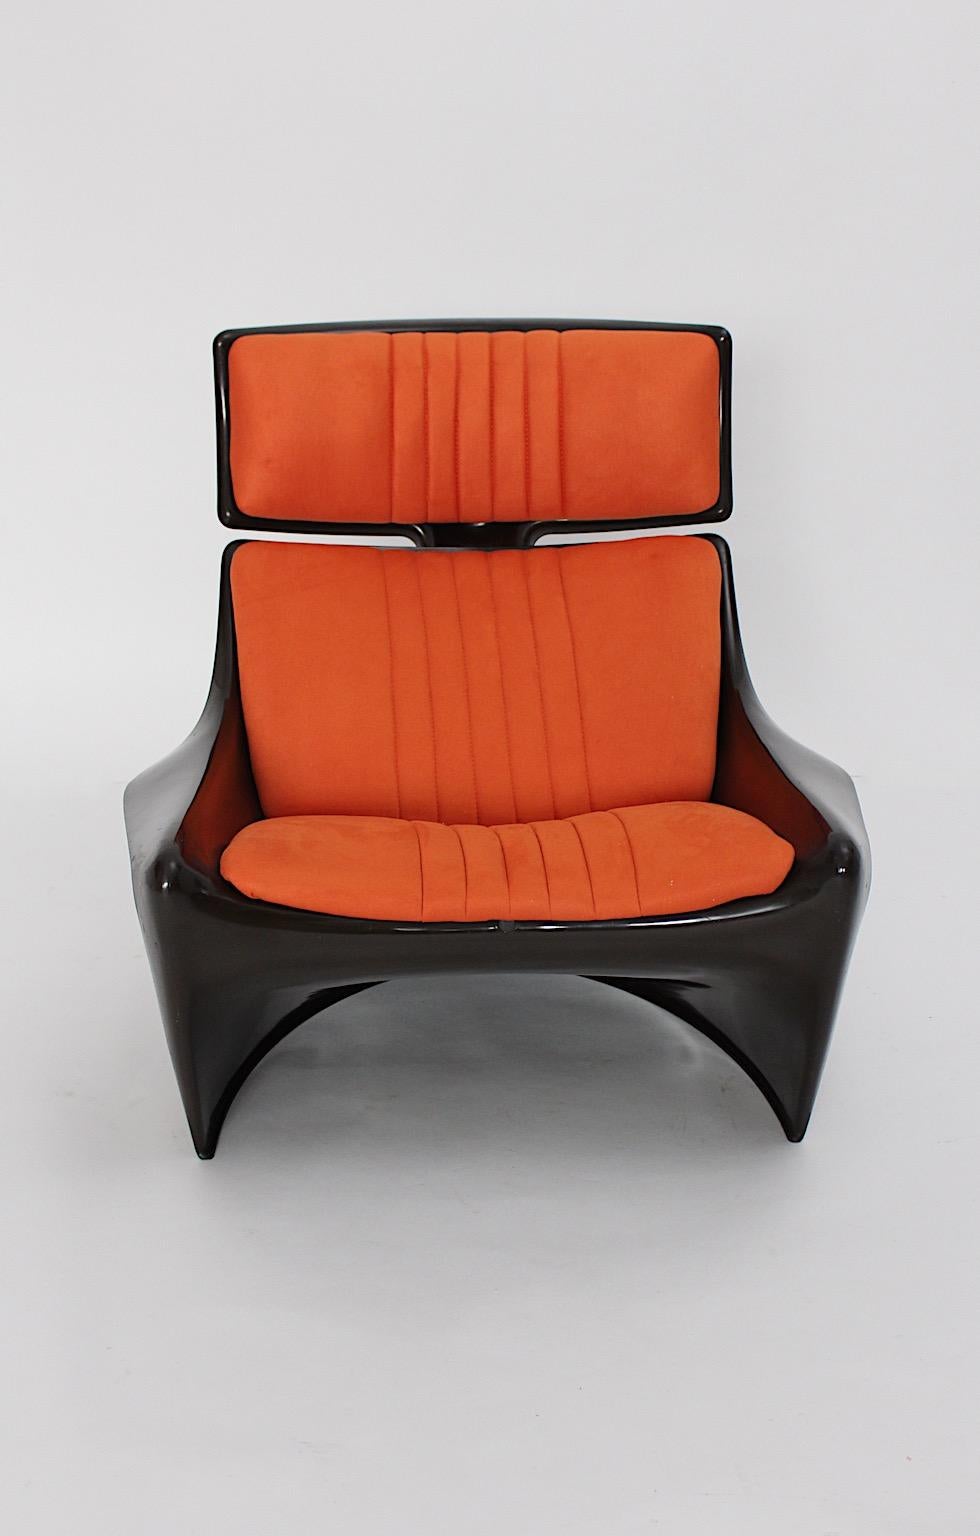 Mid-20th Century Space Age Vintage Brown Orange Plastic Lounge Chair Steen Ostergaard 1960s For Sale